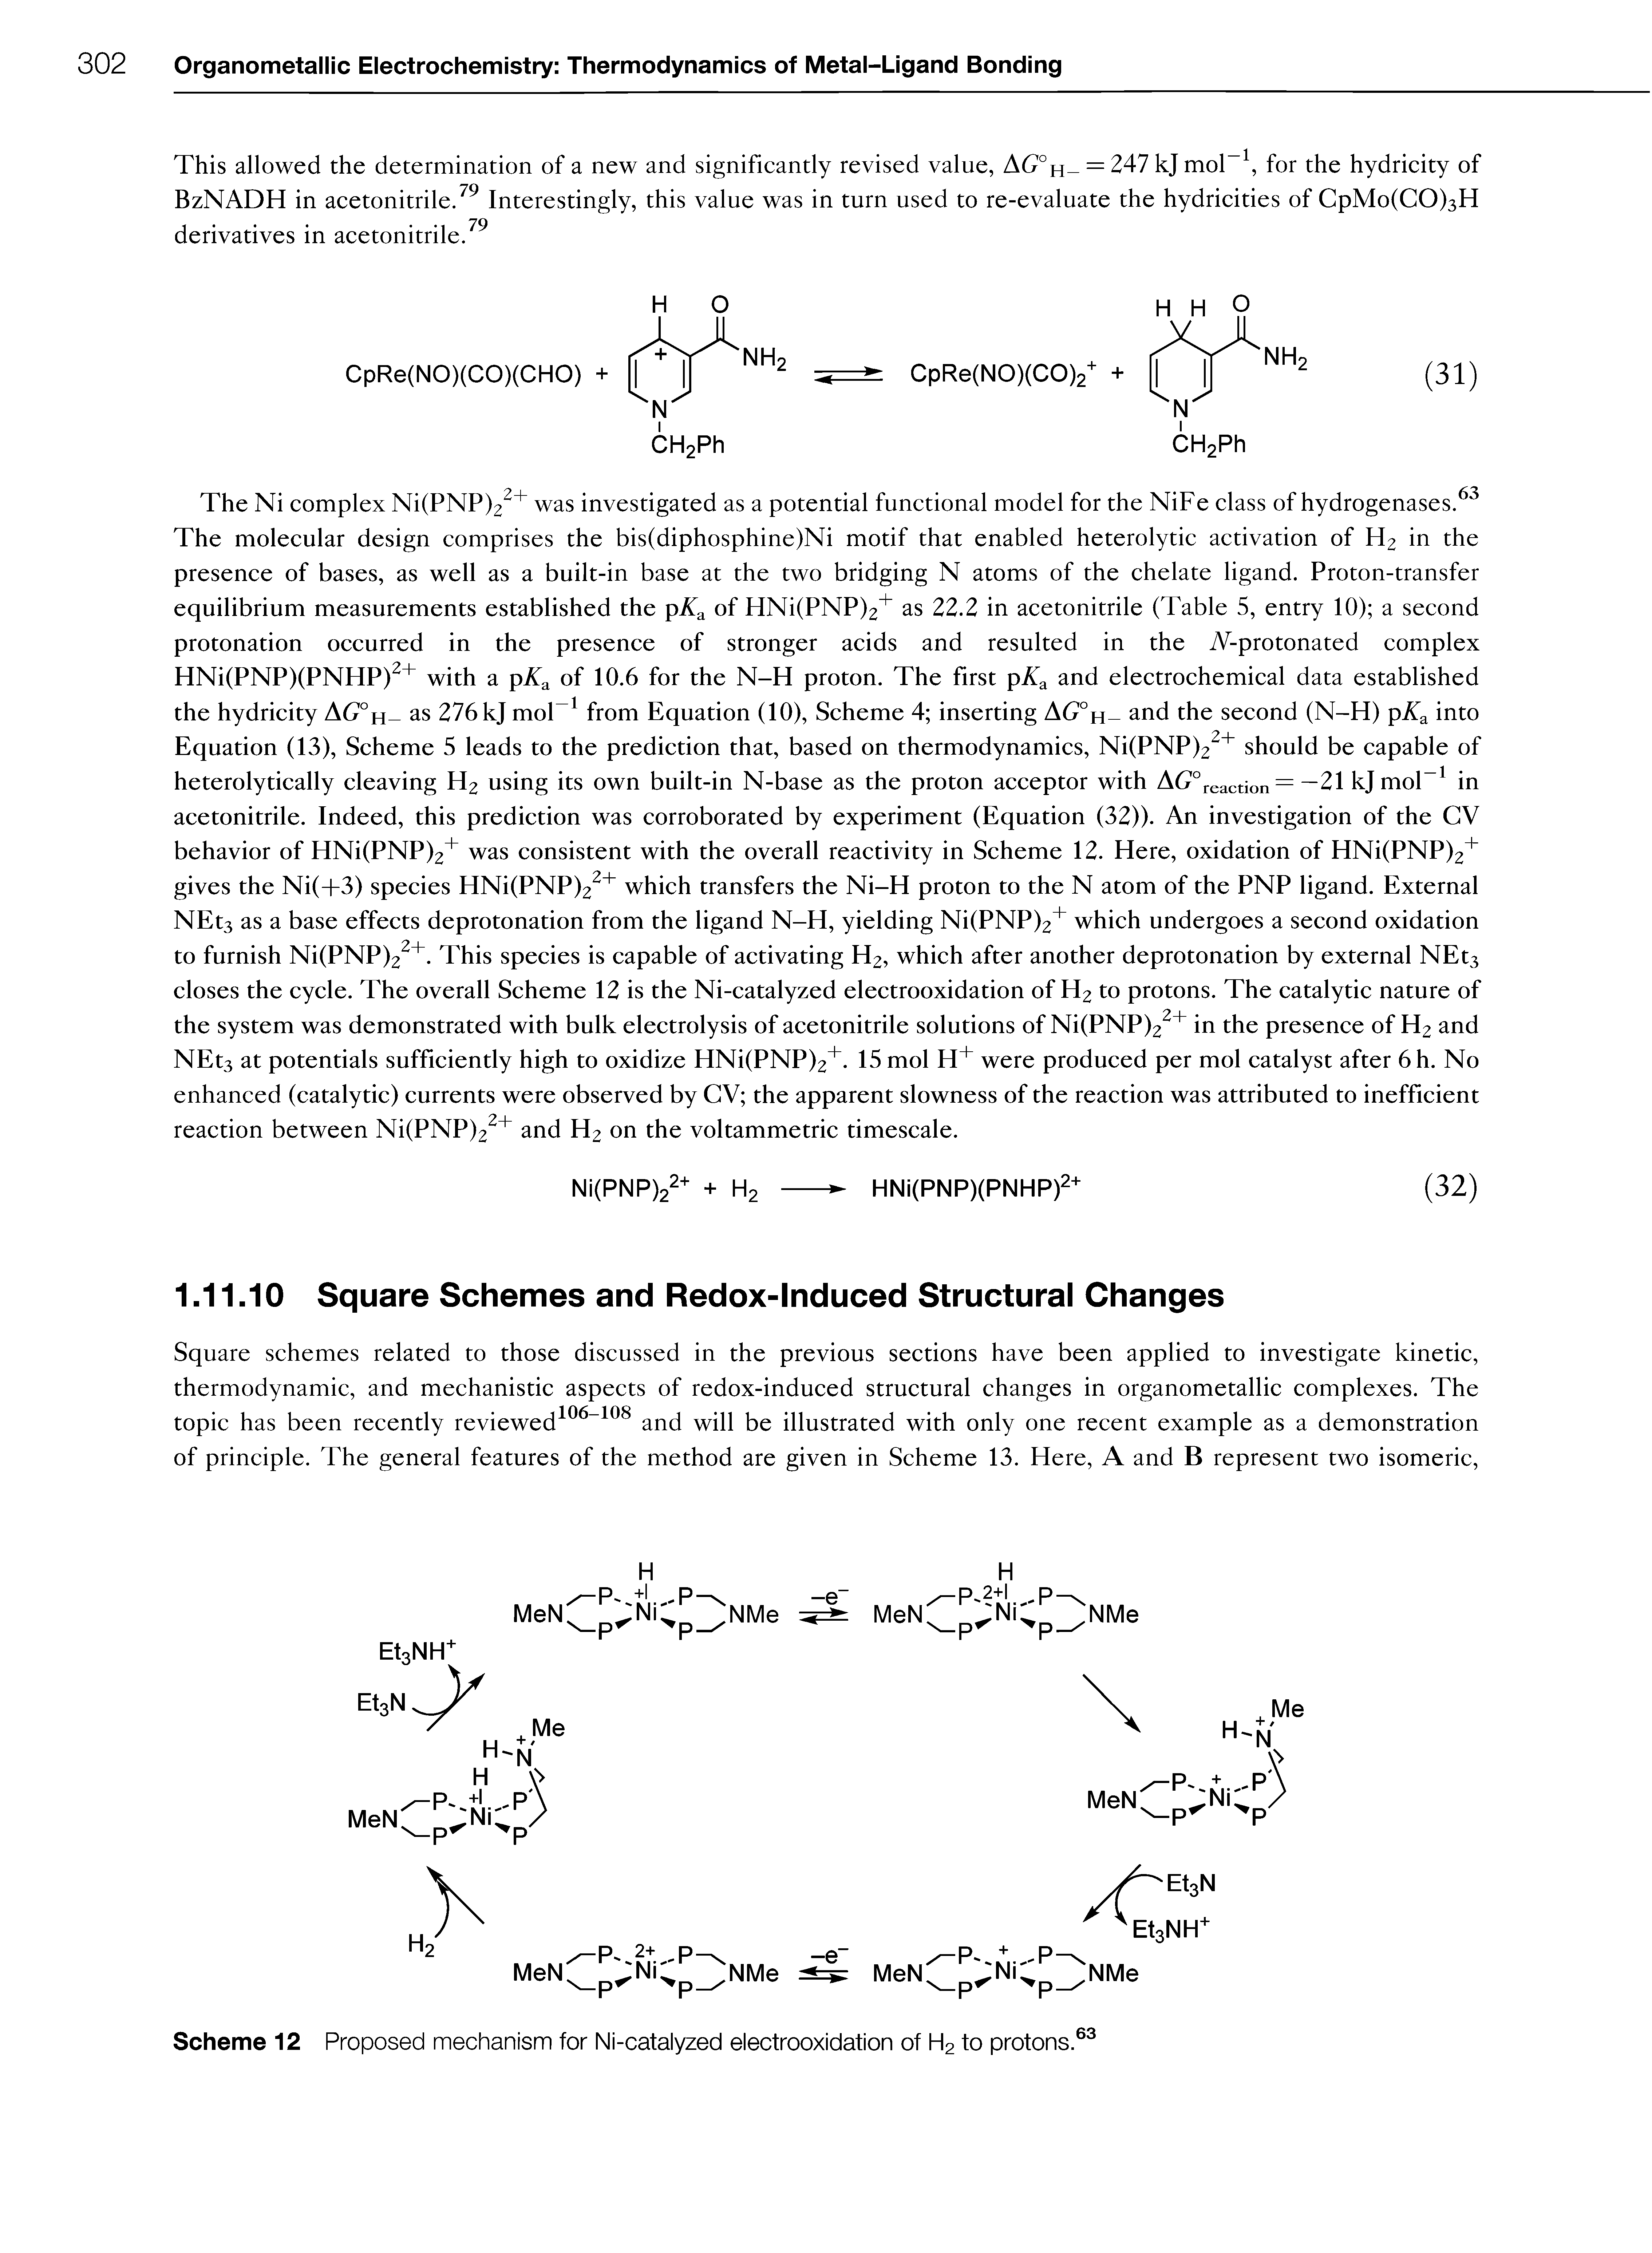 Scheme 12 Proposed mechanism for Ni-catalyzed electrooxidation of H2 to protons. ...